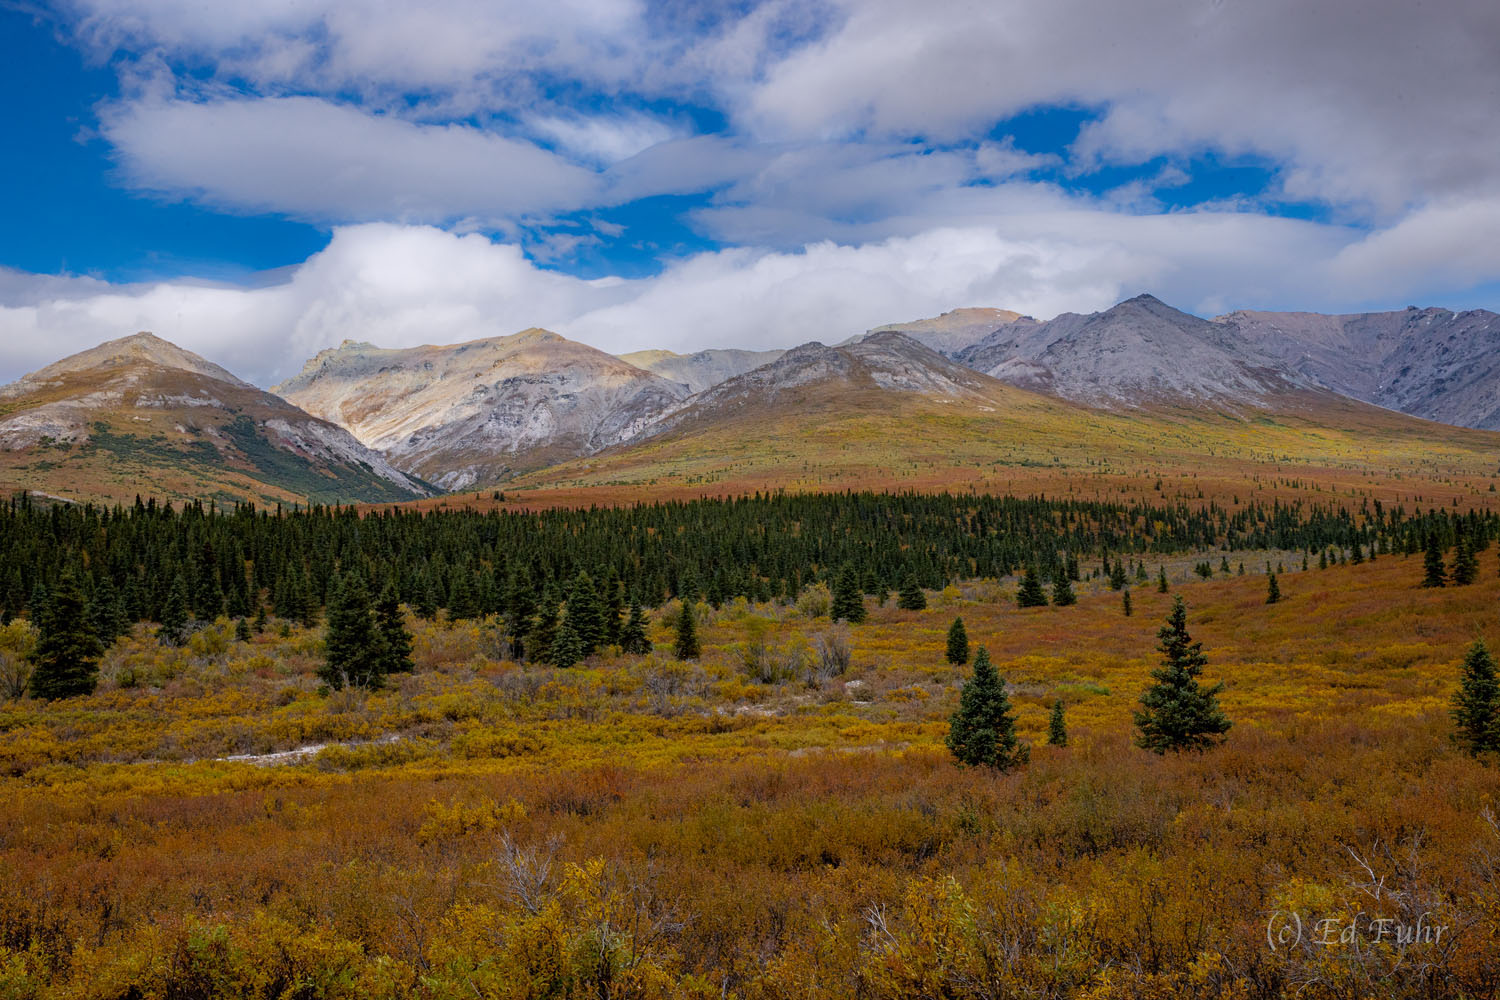 The stunning colors of autumn tundra, blue skies and white clouds provide a mesmerizing entrance into Denali National Park, near...